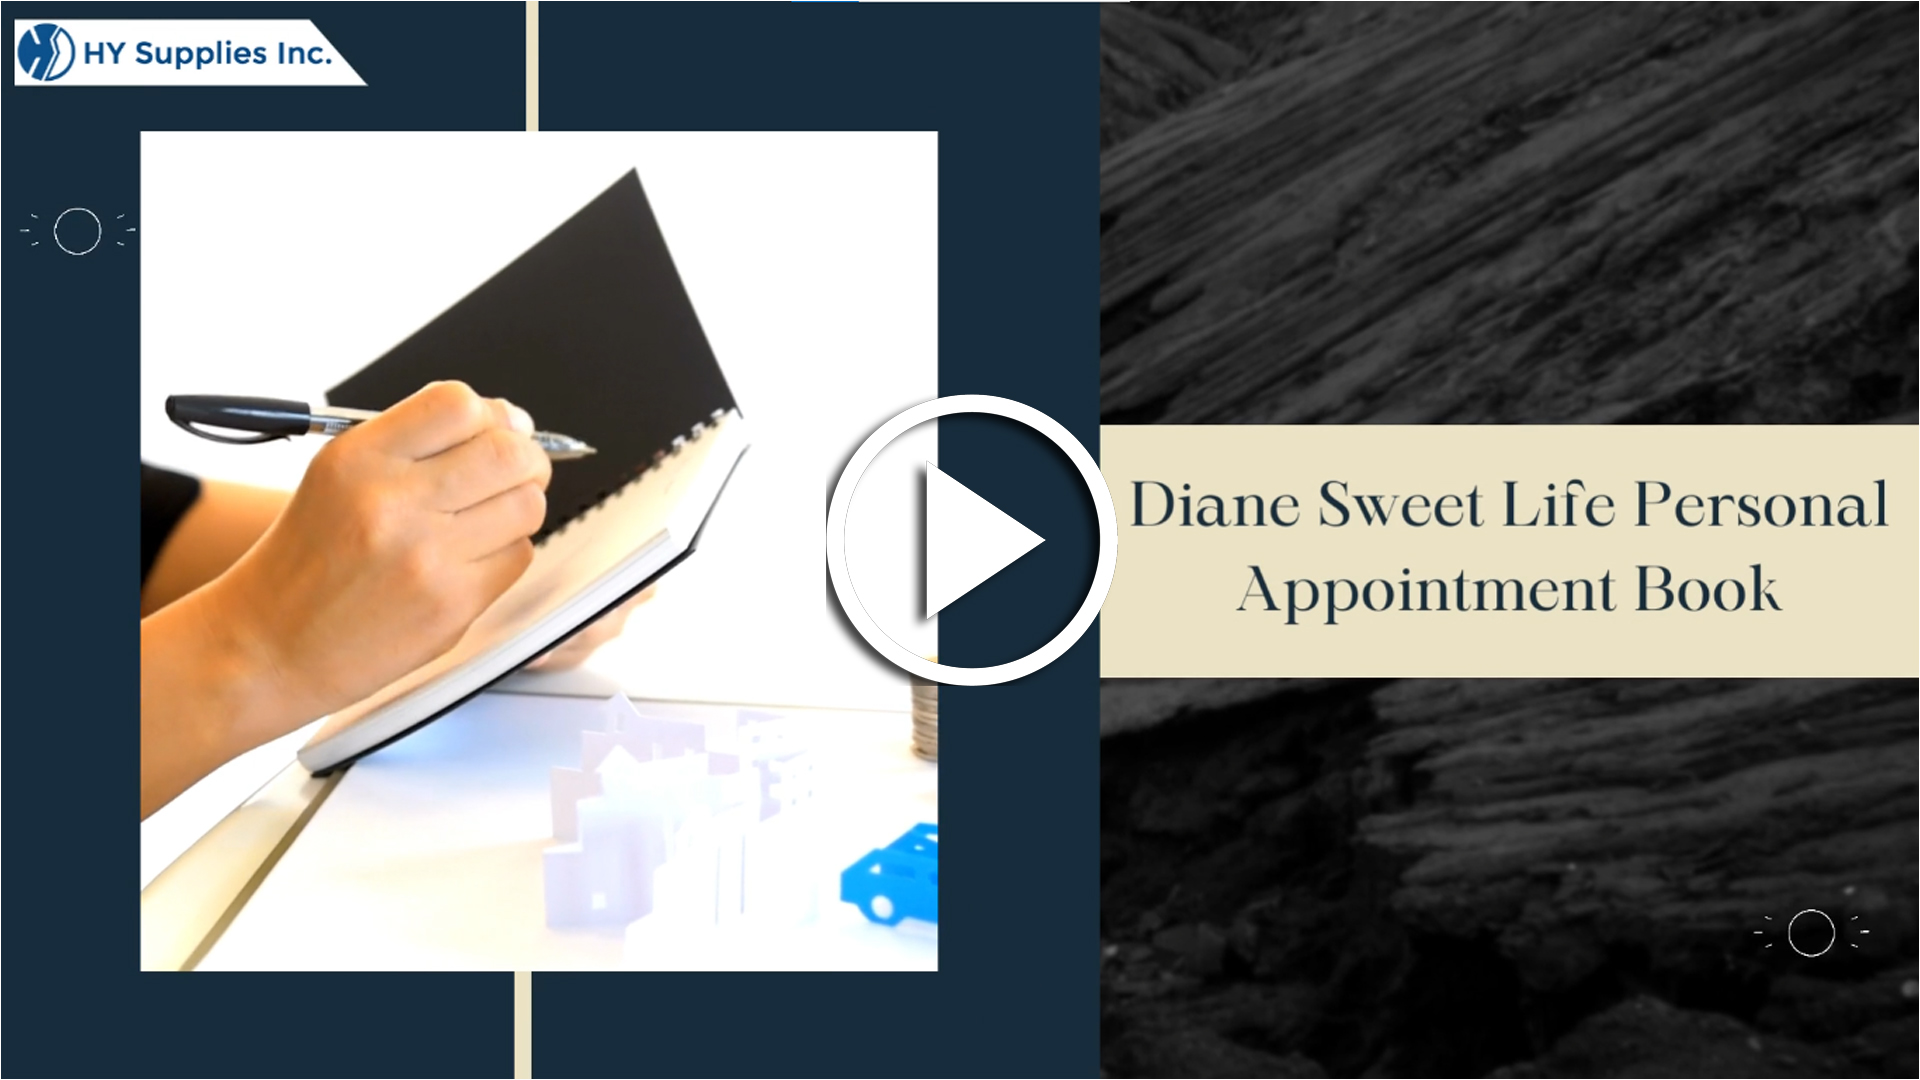 Diane Sweet Life Personal Appointment Book